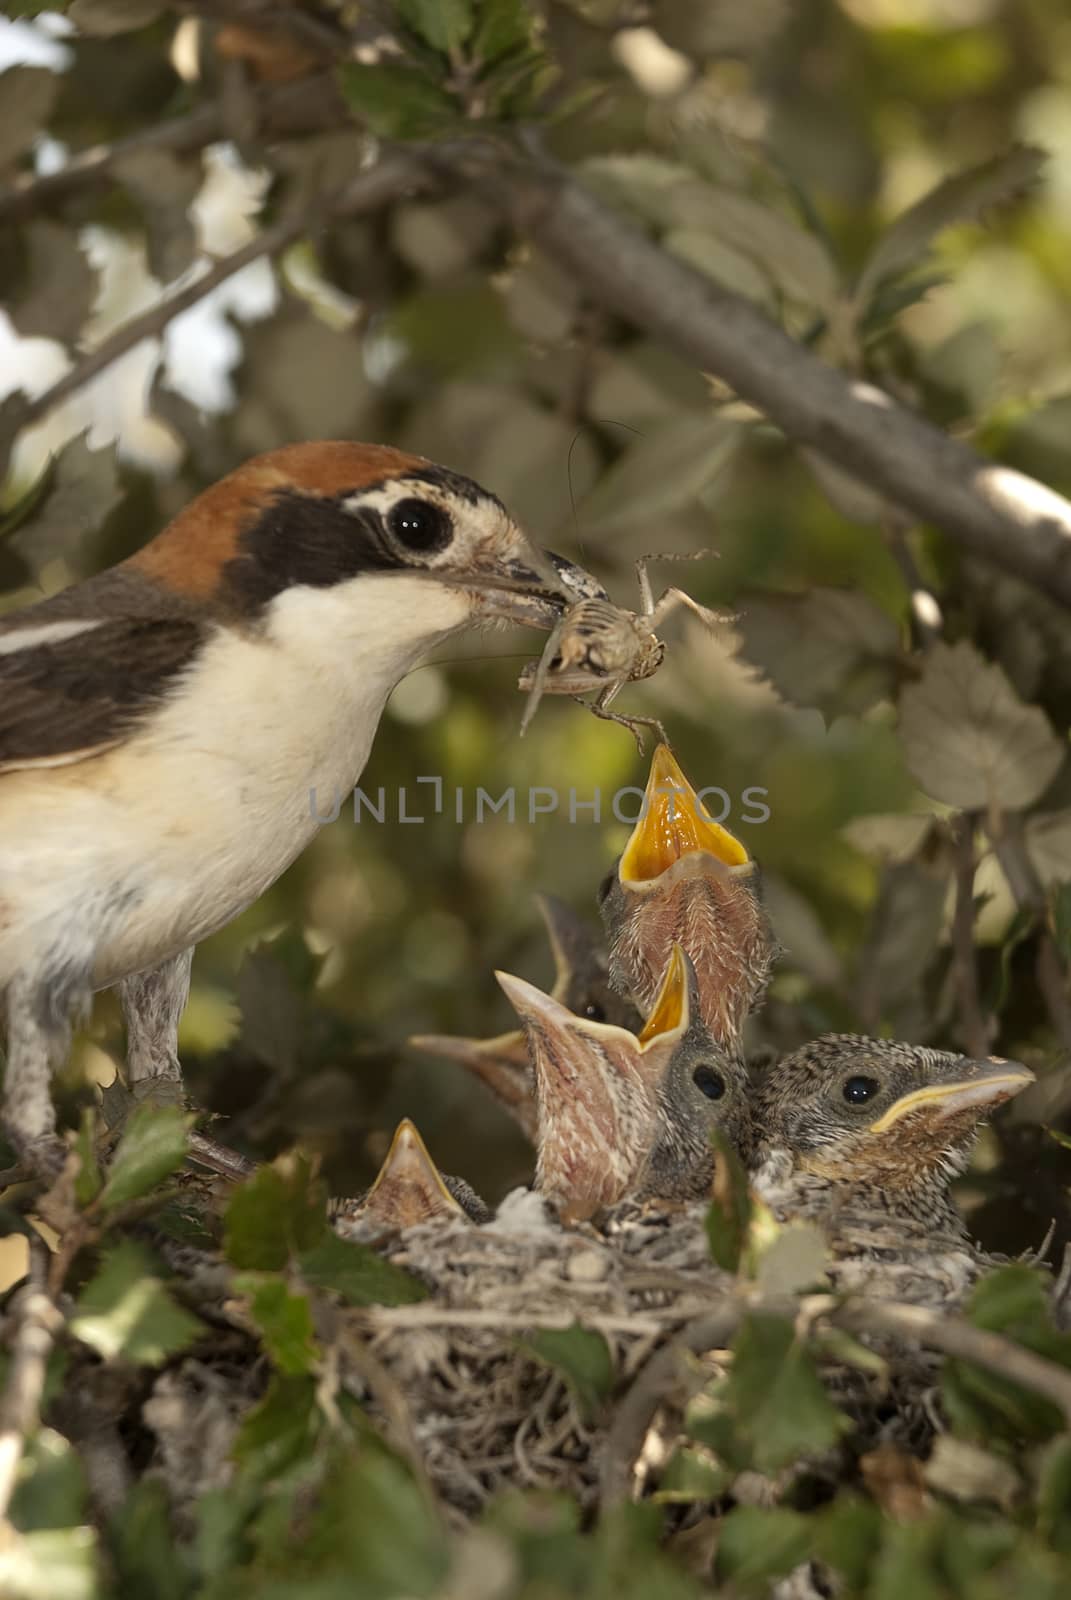 Woodchat shrike. Lanius senator, in the nest with his pup